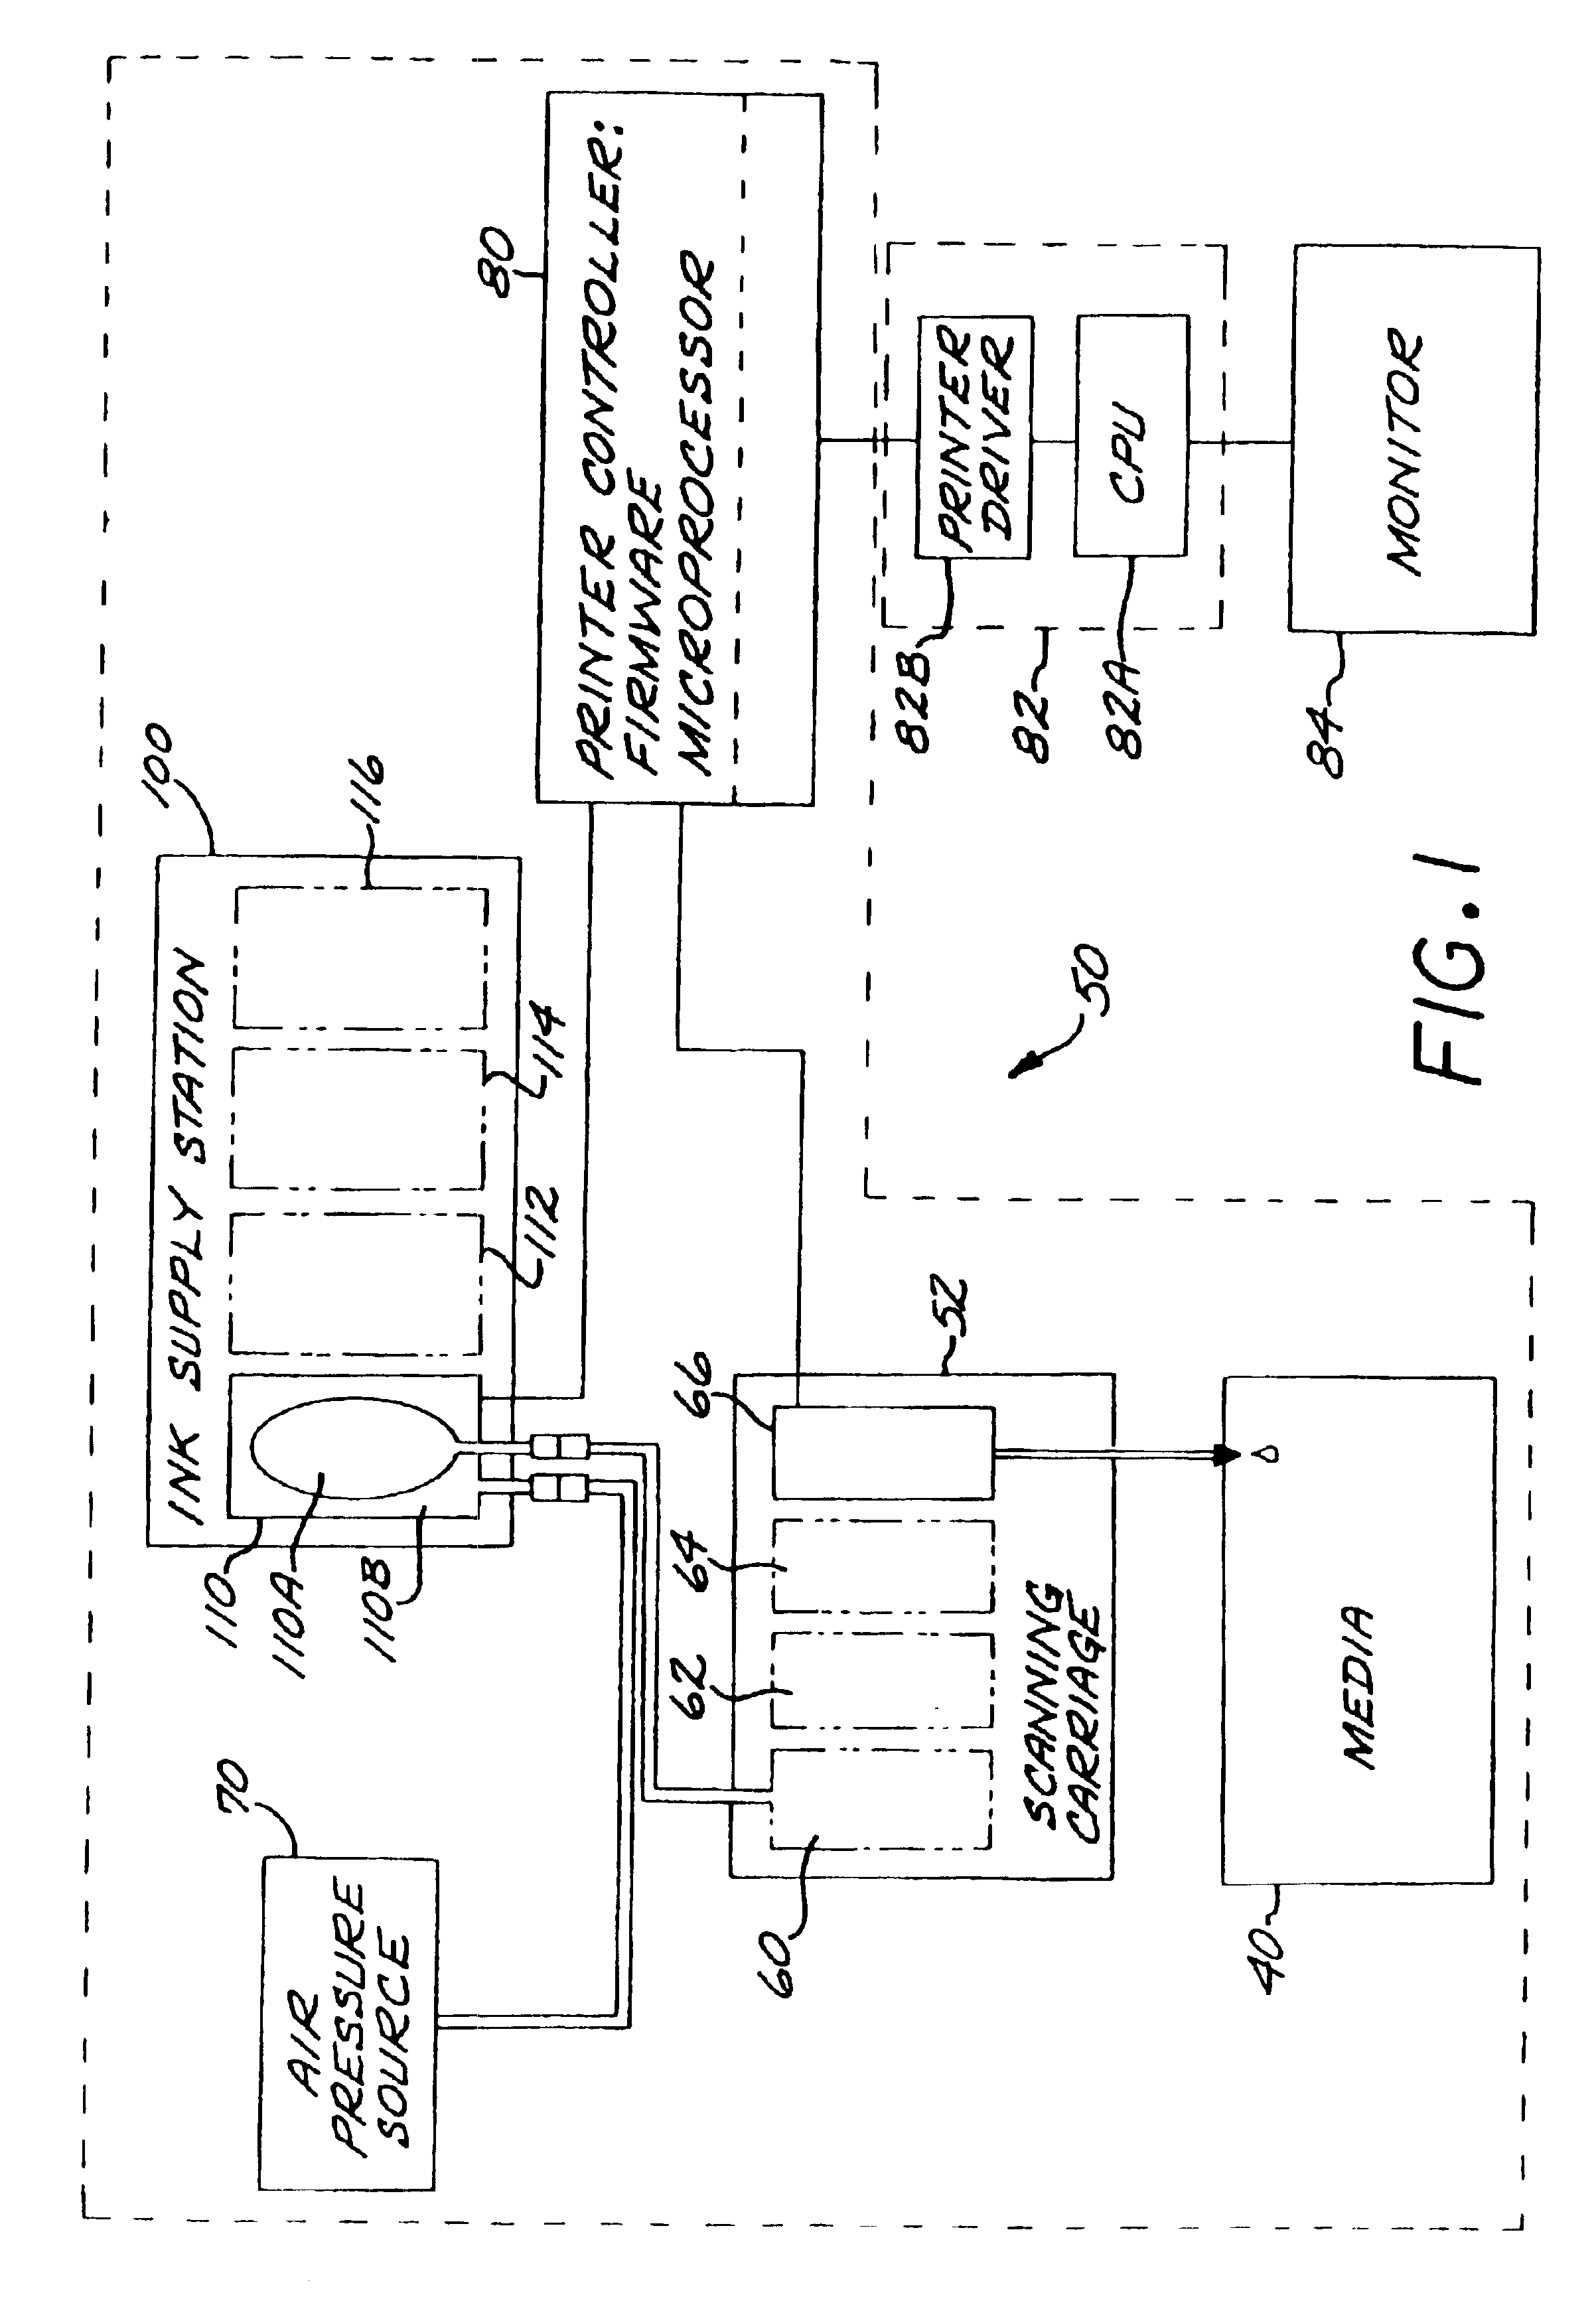 Techniques for improving pressure sensor shock robustness in fluid containment devices